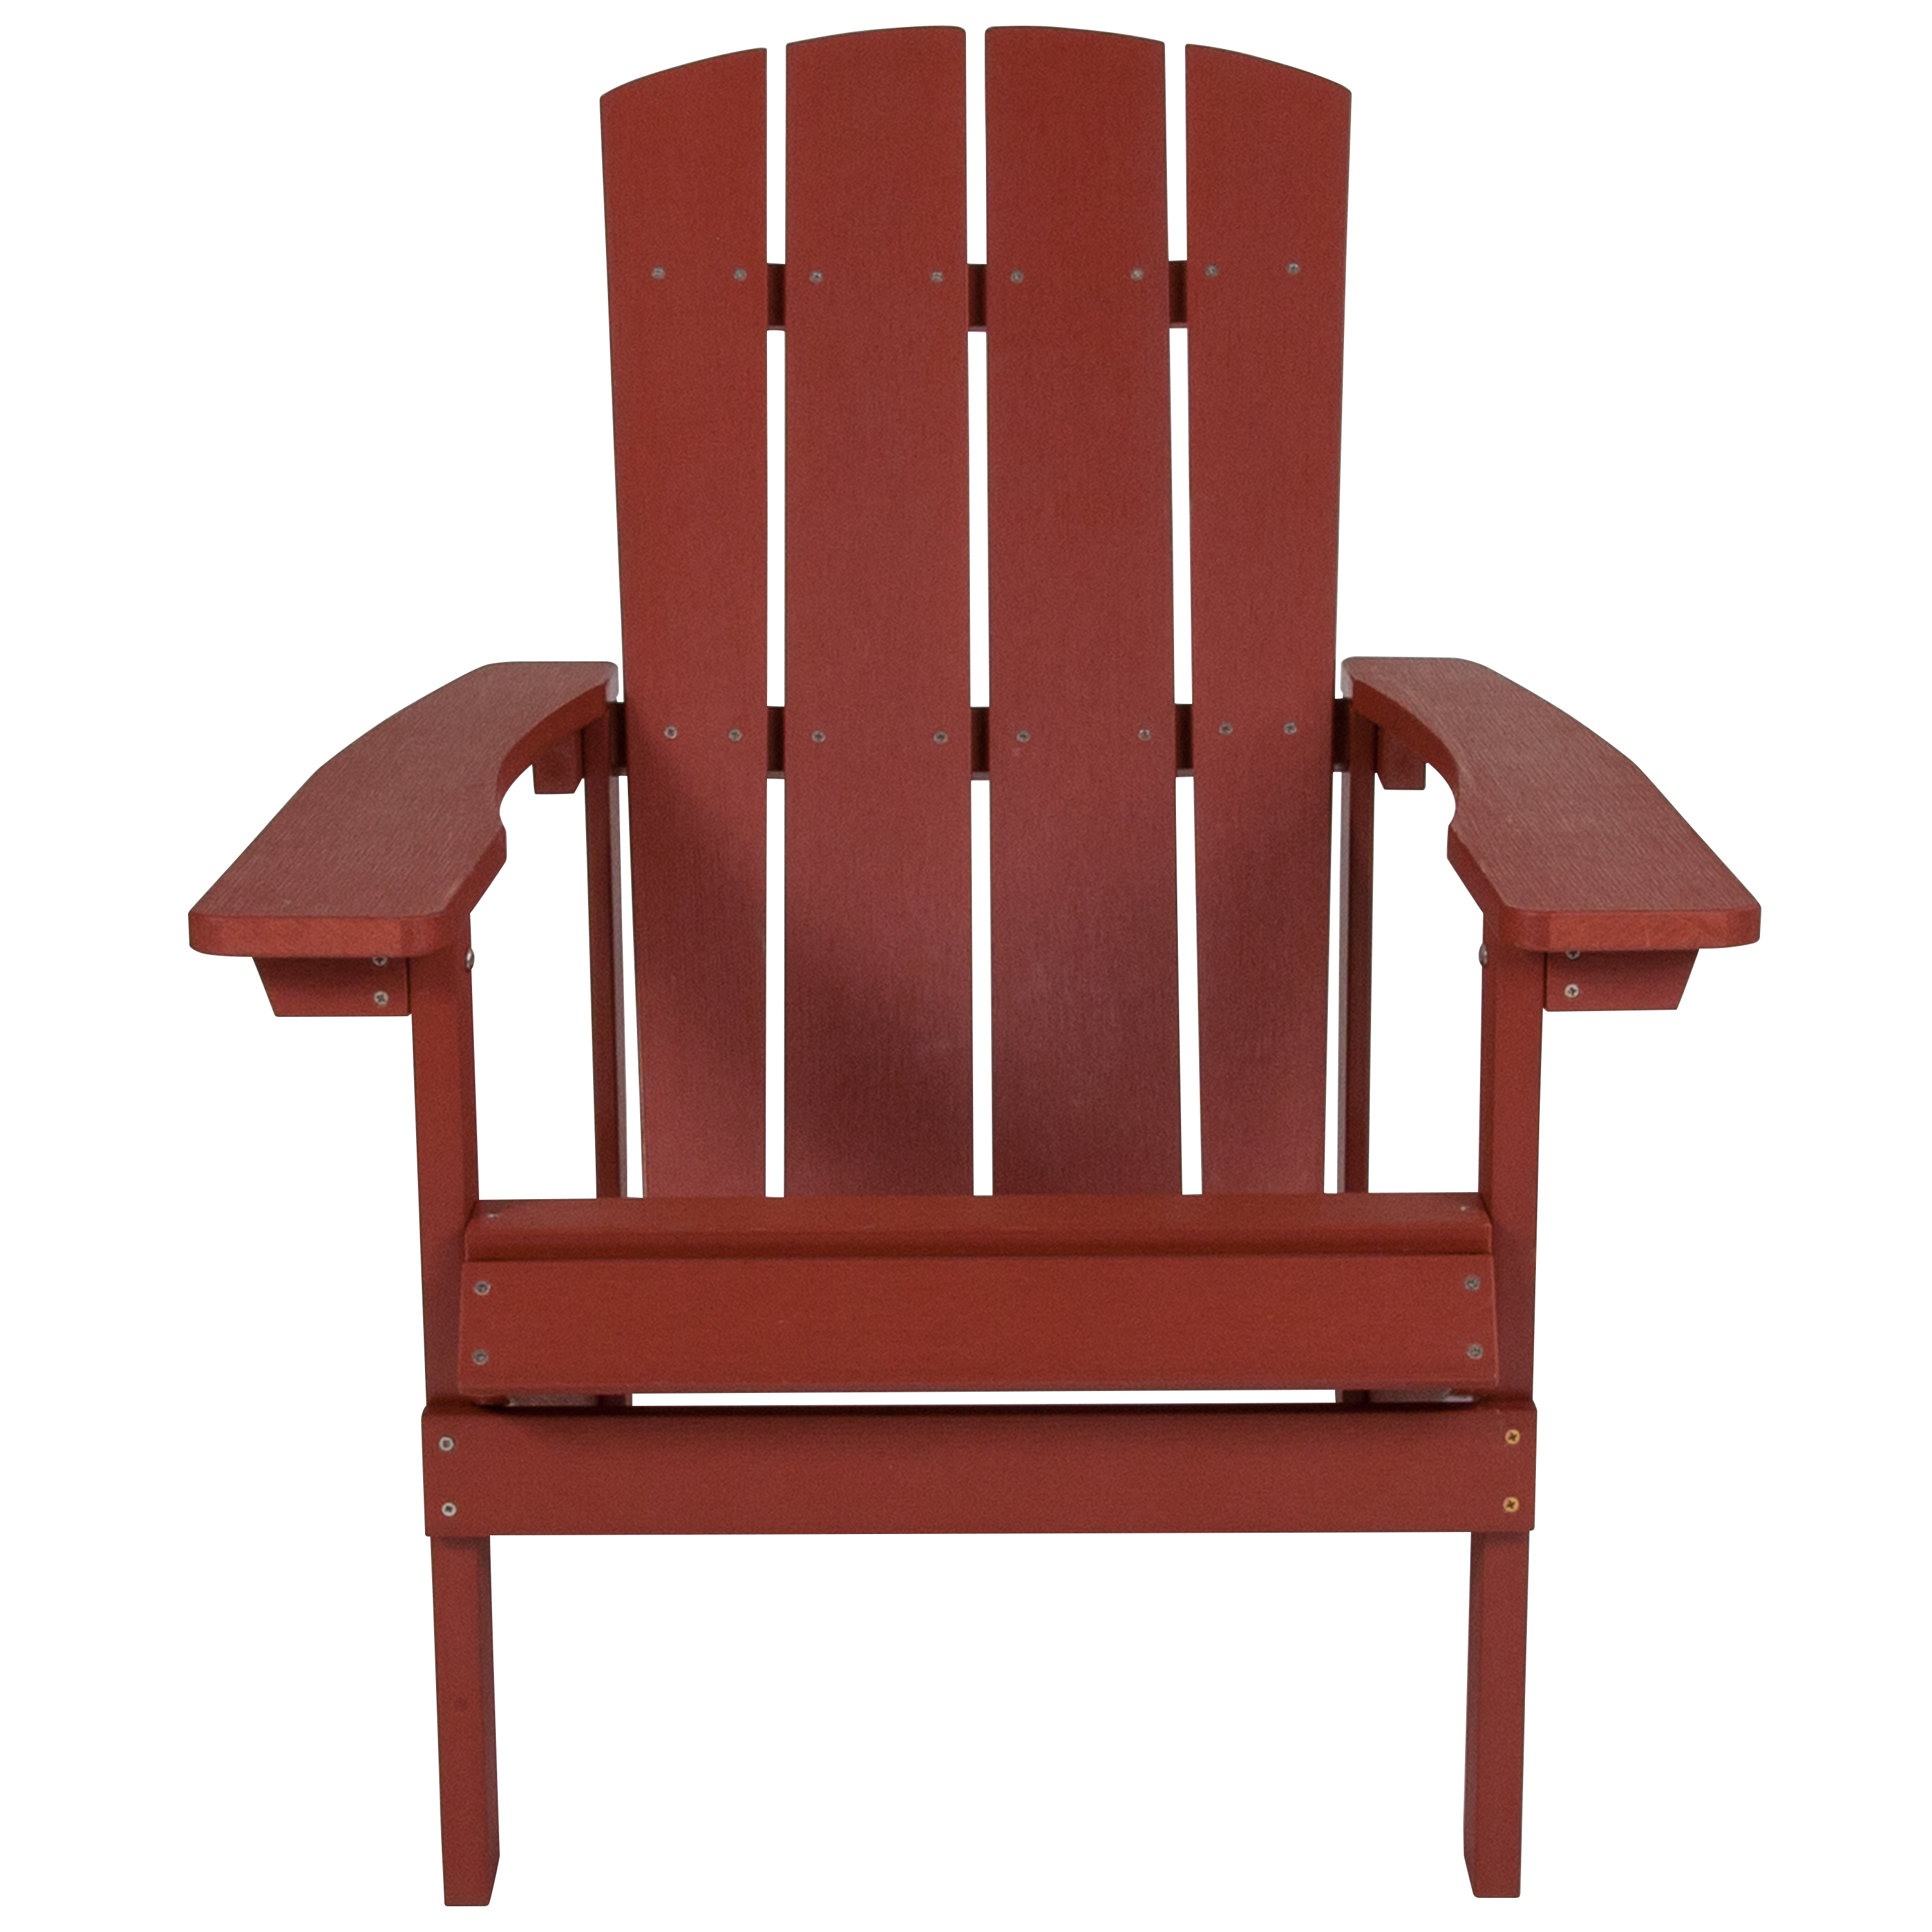 Flash Furniture Charlestown All-Weather Poly Resin Wood Adirondack Chair in Red - image 1 of 12